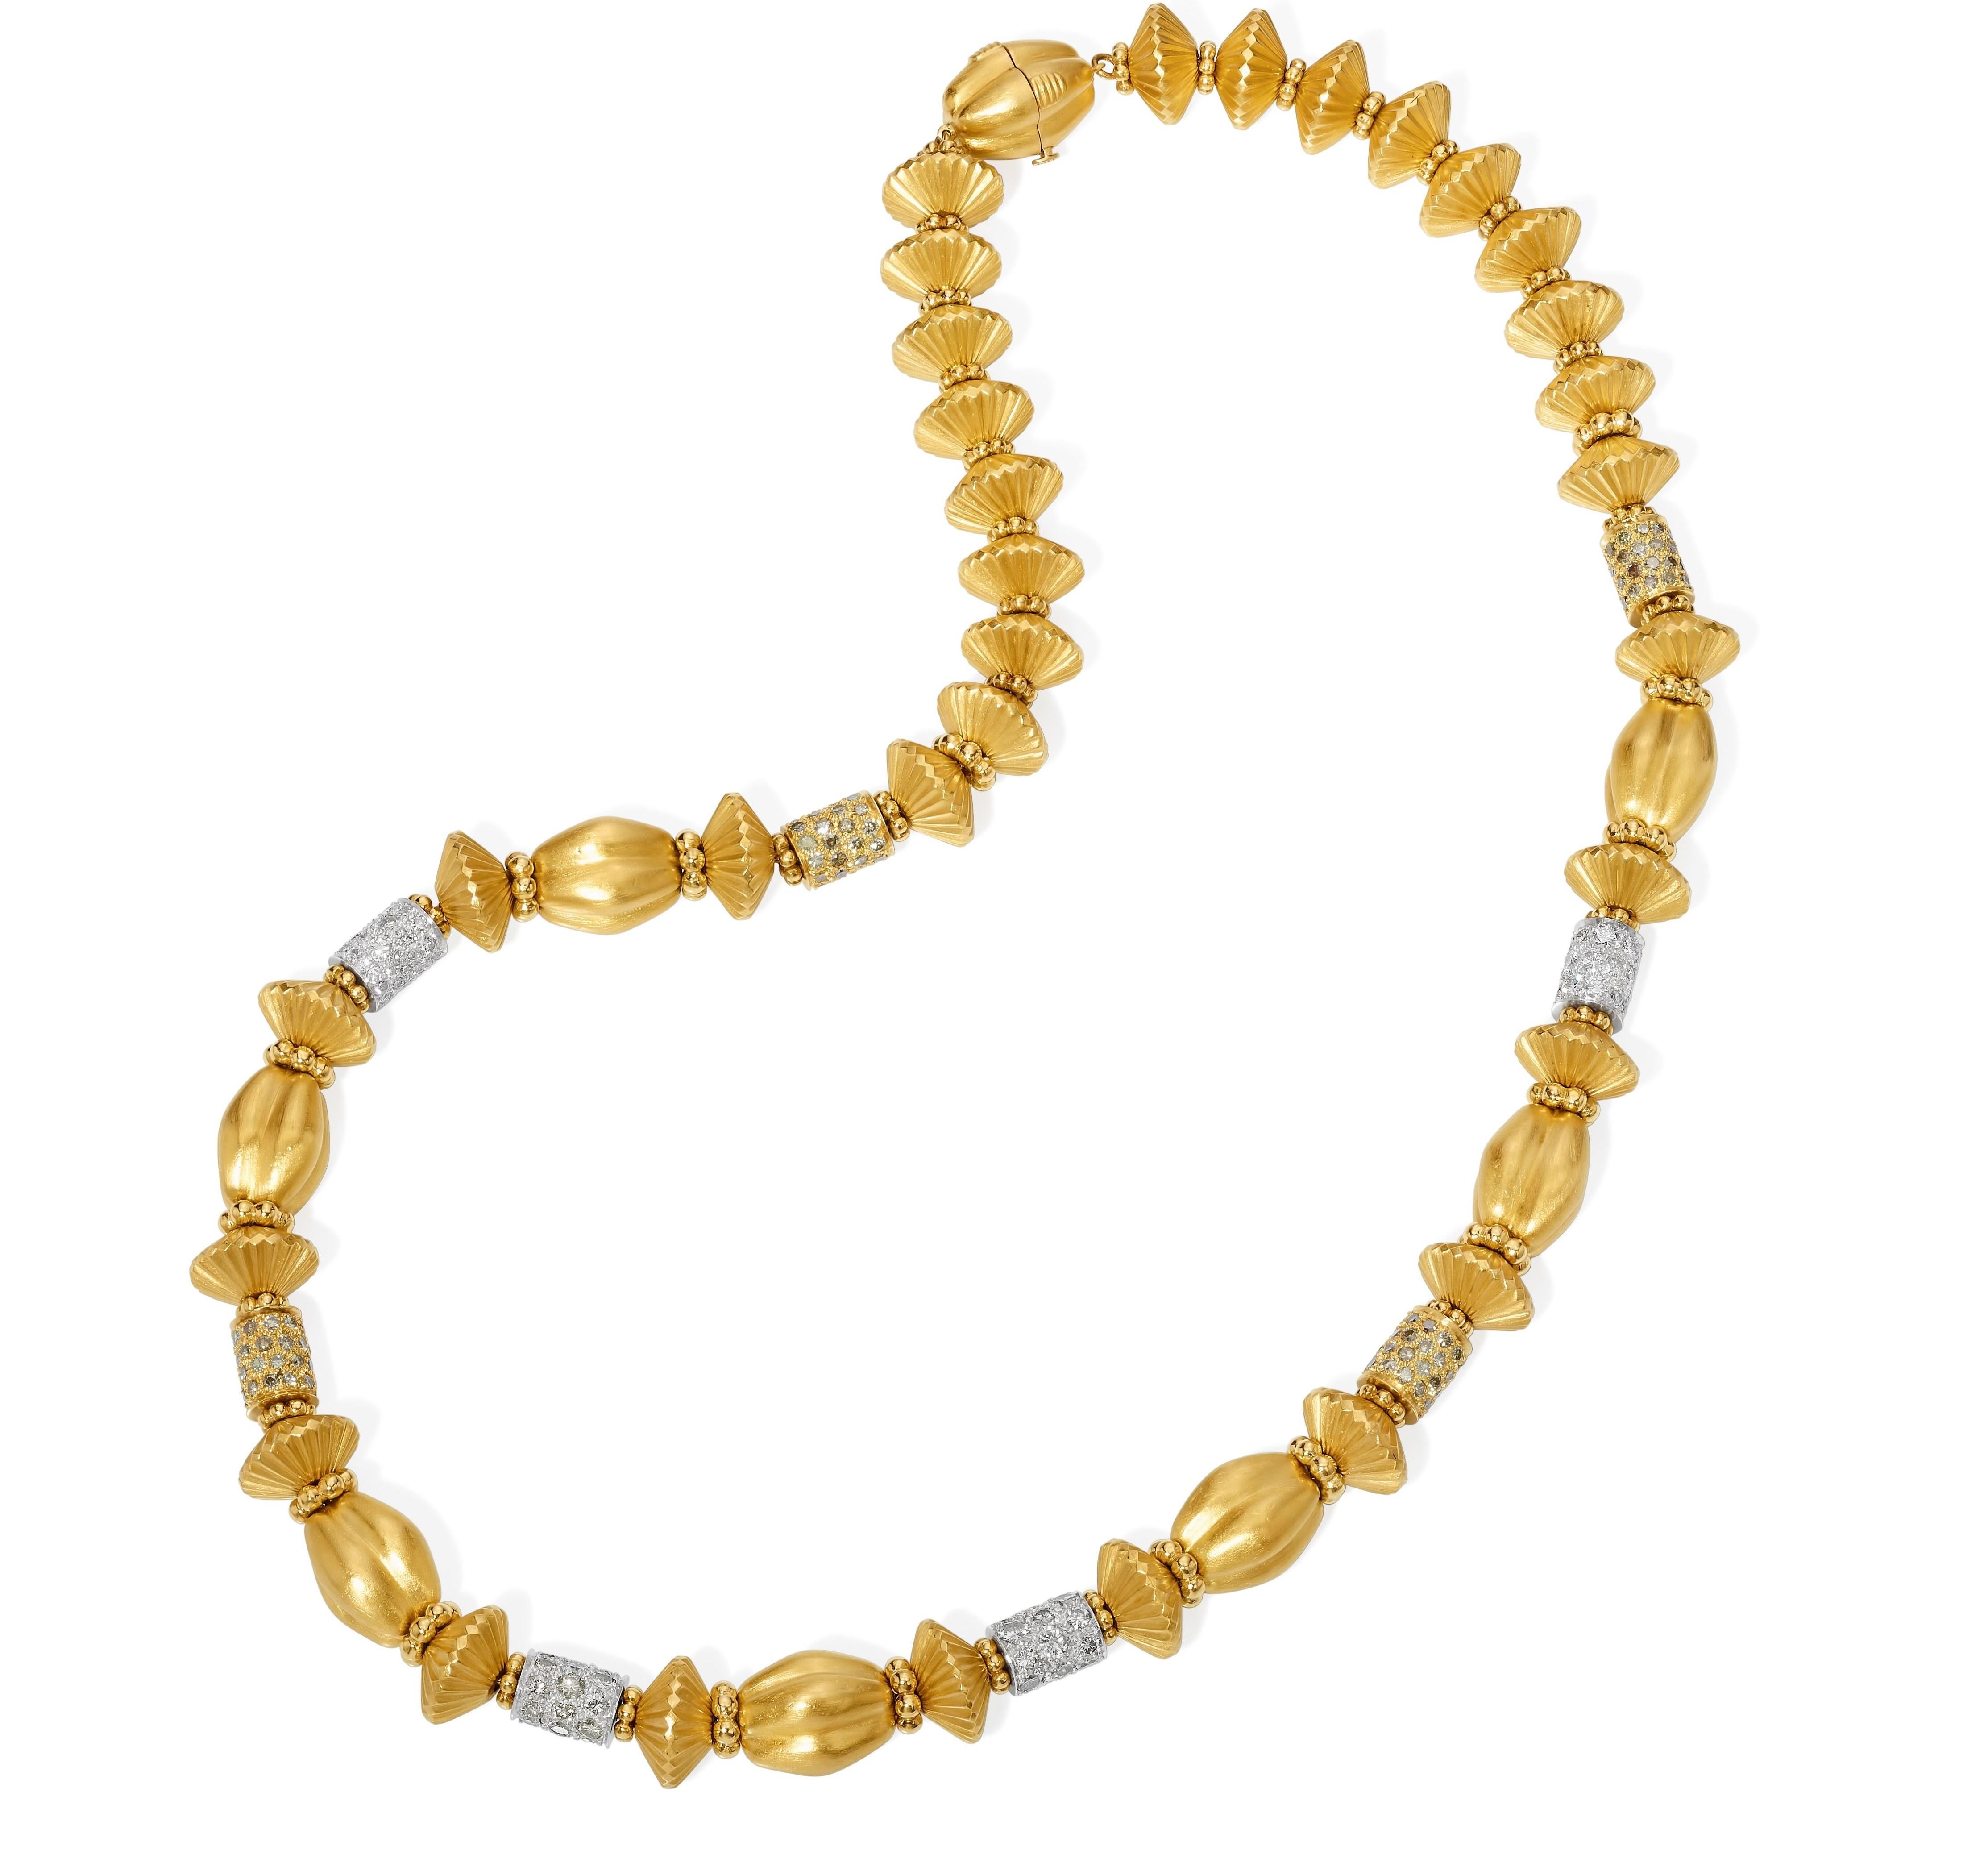 From the Eiseman Estate Jewelry Collection, 22 karat yellow gold yellow and white diamond rondel necklace. This necklace is crafted with 96 pave set round brilliant cut diamonds with a total combined weight of 4.80 carats. These diamonds have H-I